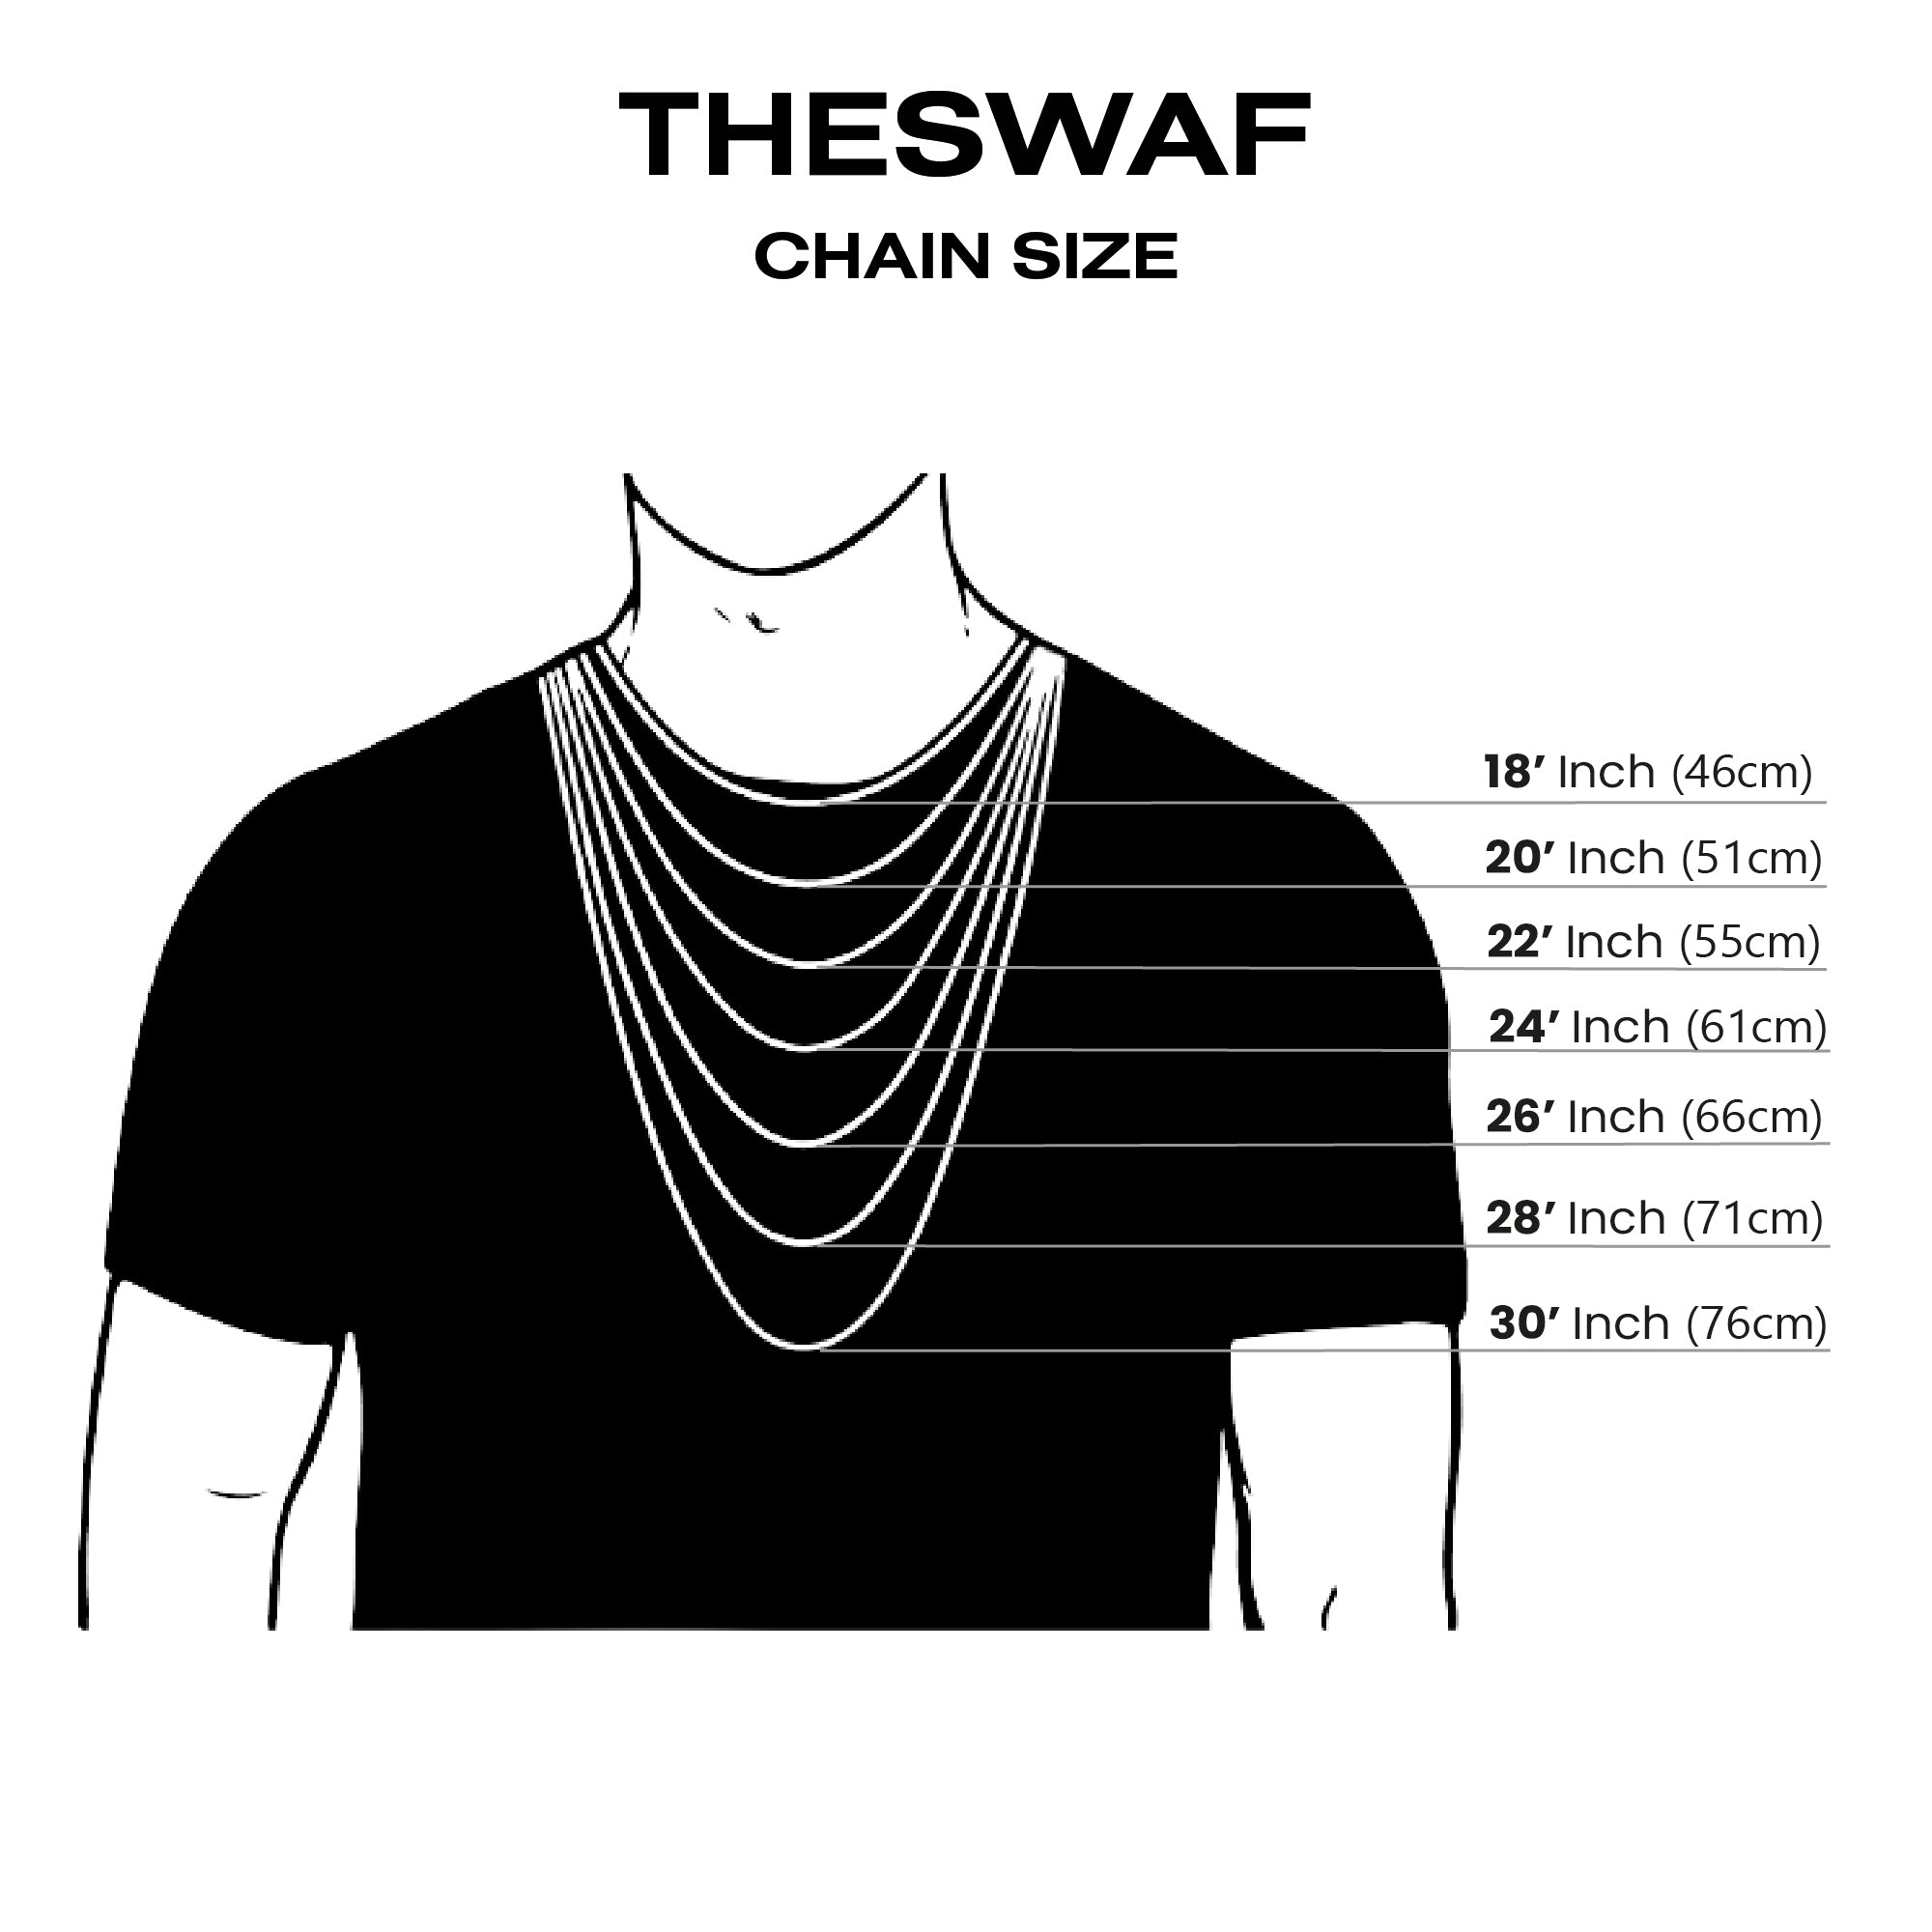 Theswaf